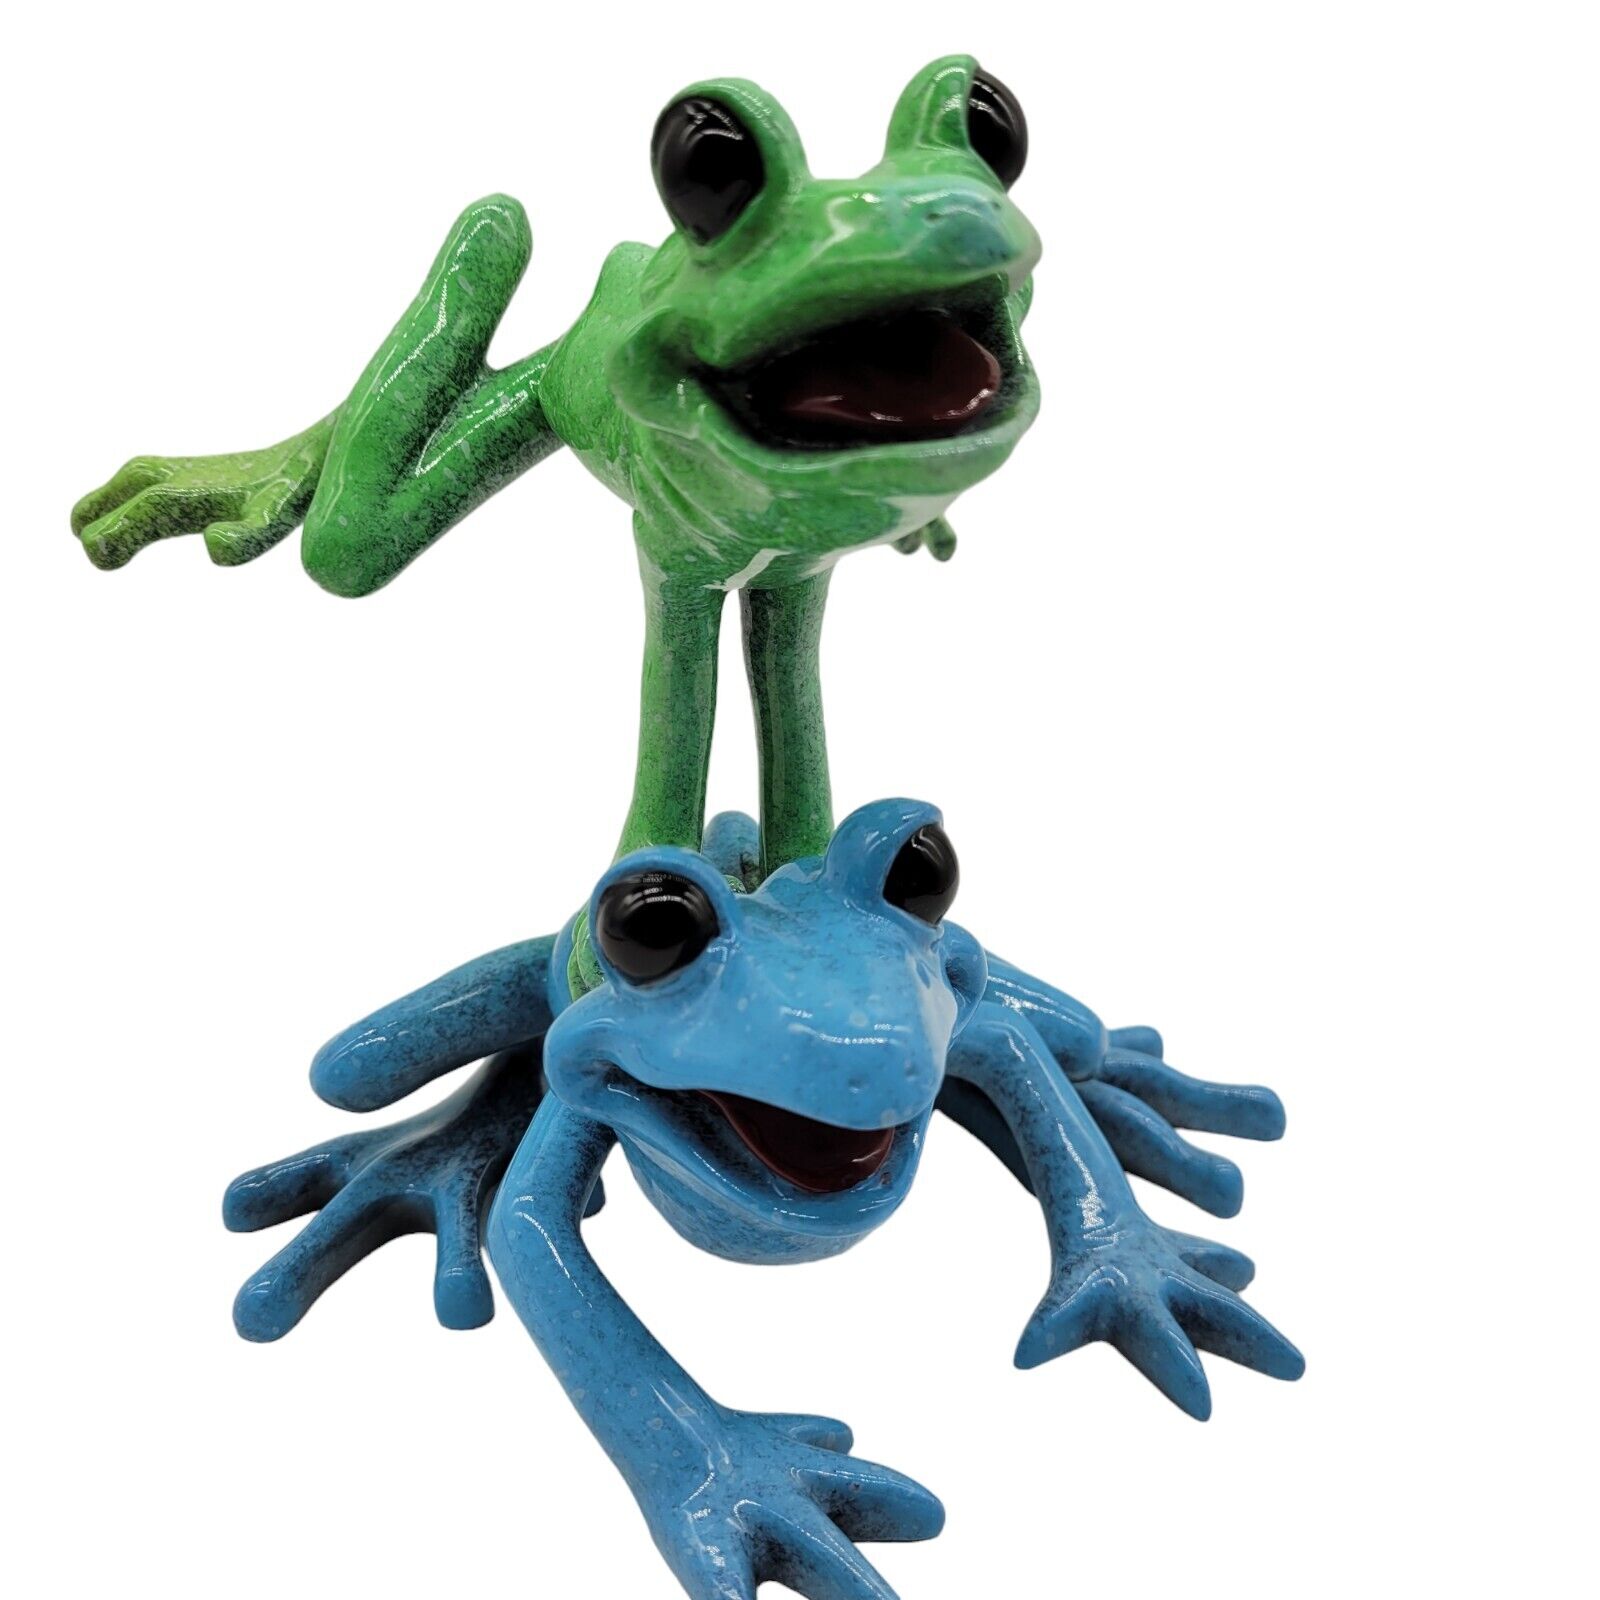 Kitty\'s Critters Leap Frogs Whimsical Figurine Statue 2005 Anthropomorphic